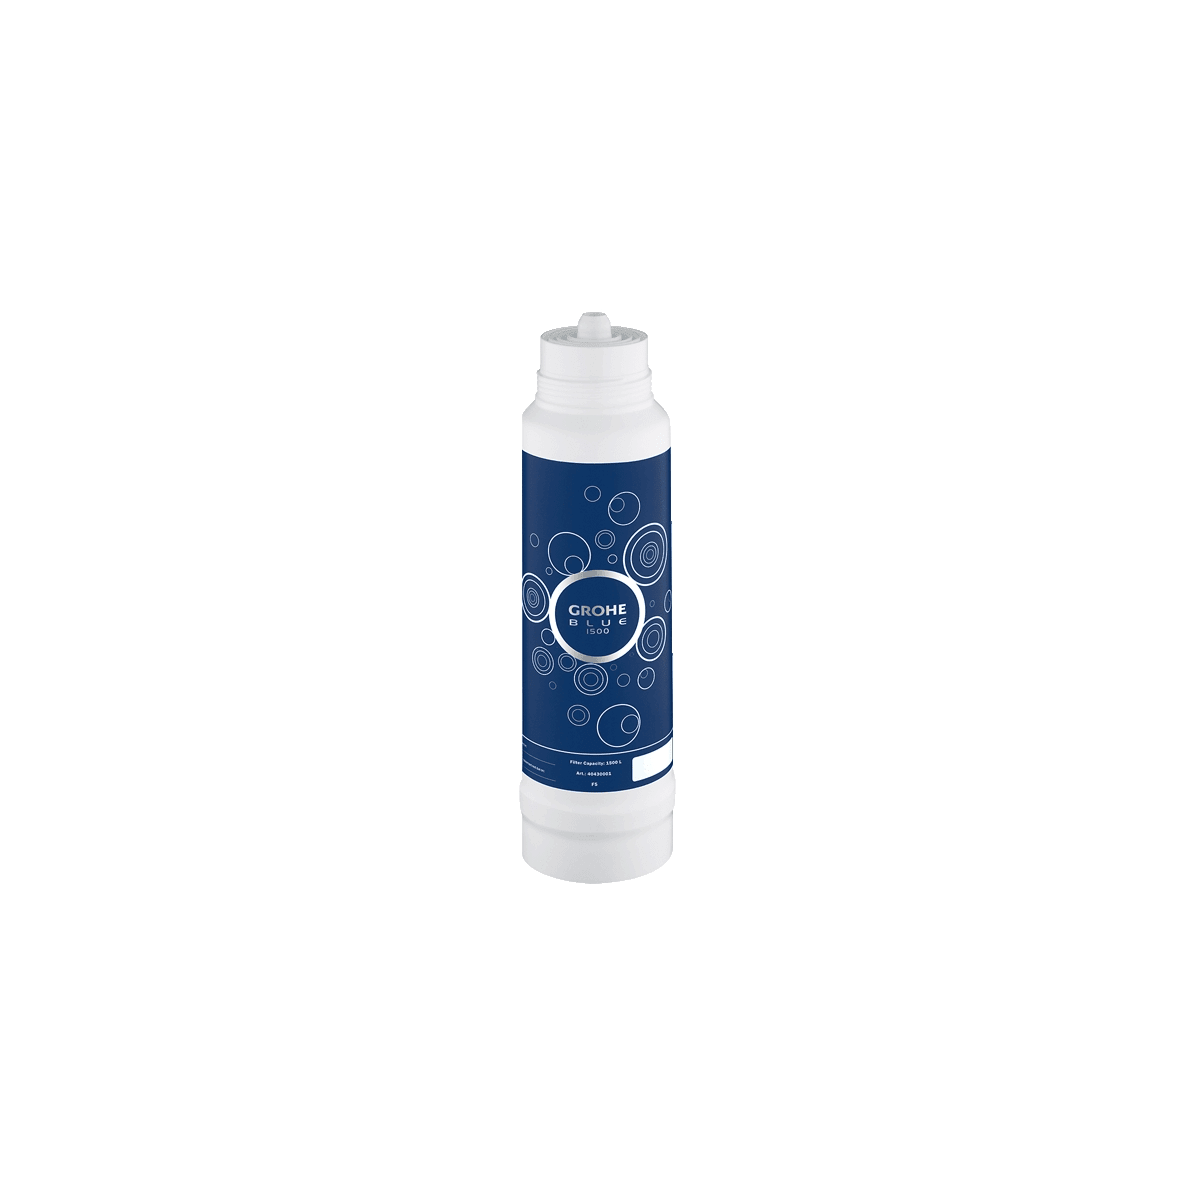 Grohe Blue filter M size - 40430001